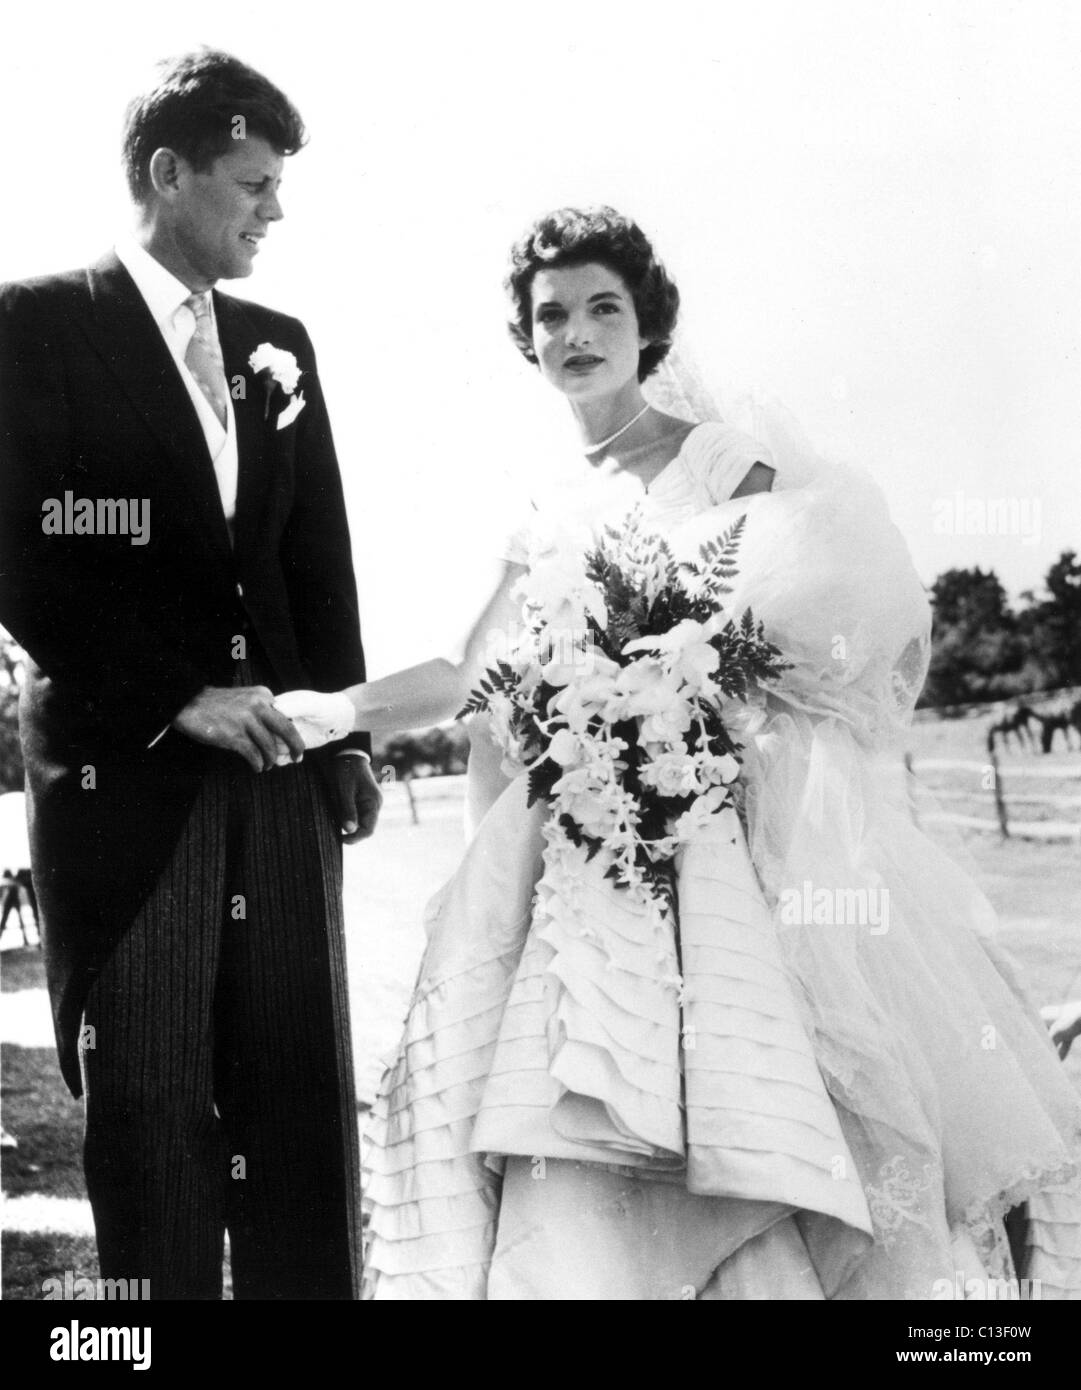 JOHN F. KENNEDY and JACQUELINE BOUVIER KENNEDY on their wedding day, Newport, R.I., 1953 Stock Photo